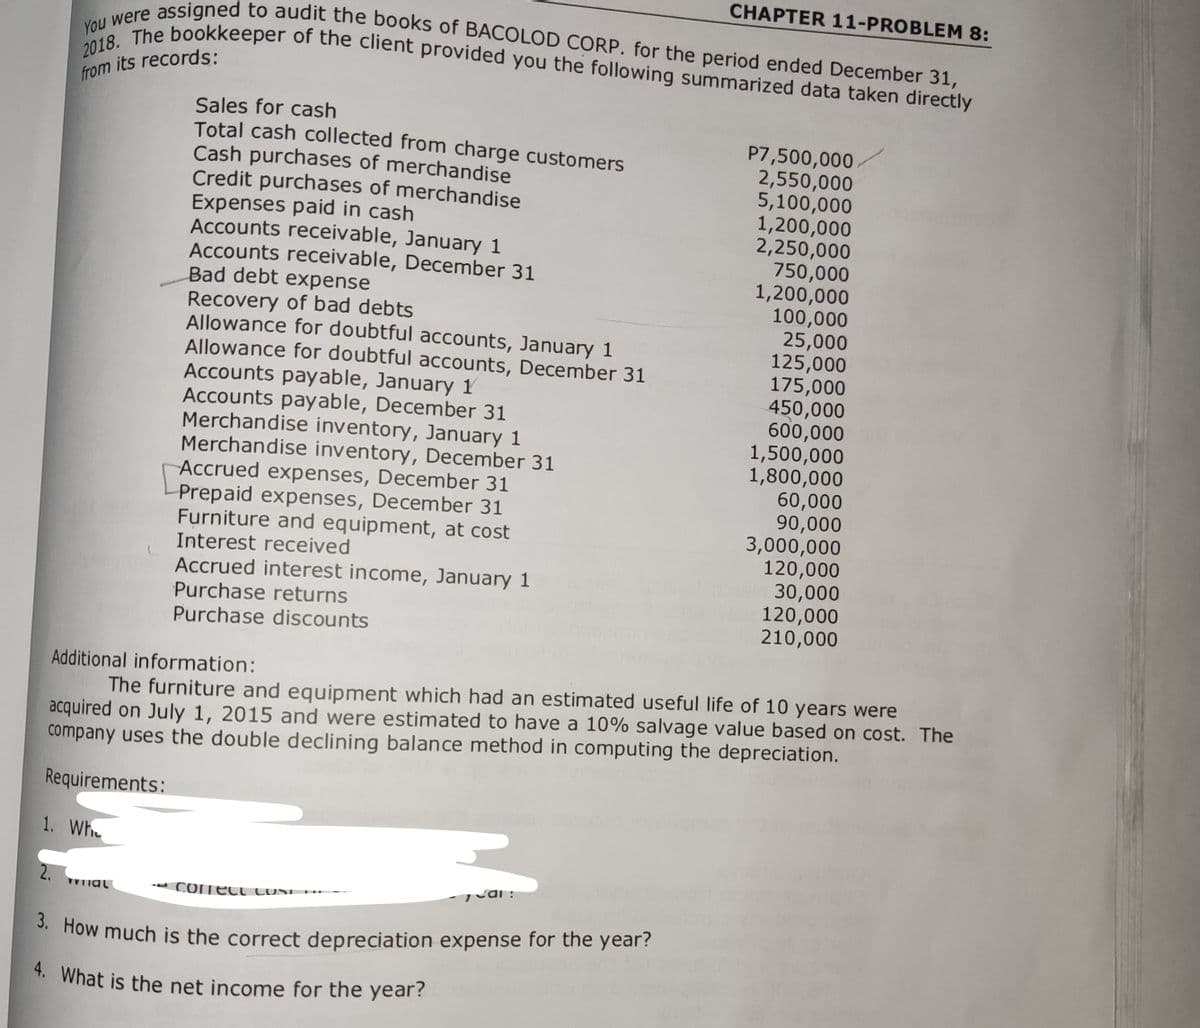 2018. The bookkeeper of the client provided you the following summarized data taken directly
You were assigned to audit the books of BACOLOD CORP. for the period ended December 31,
from its records:
1. Whe
2.
Sales for cash
Total cash collected from charge customers
Cash purchases of merchandise
Credit purchases of merchandise
Expenses paid in cash
Accounts receivable, January 1
Accounts receivable, December 31
Bad debt expense
Recovery of bad debts
Allowance for doubtful accounts, January 1
Allowance for doubtful accounts, December 31
Accounts payable, January 1
Accounts payable, December 31
wal
Merchandise inventory, January 1
Merchandise inventory, December 31
Accrued expenses, December 31
Prepaid expenses, December 31
Furniture and equipment, at cost
Interest received
Accrued interest income, January 1
Purchase returns
Purchase discounts
correct cUSE
Cai:
CHAPTER 11-PROBLEM 8:
3. How much is the correct depreciation expense for the year?
4. What is the net income for the year?
P7,500,000
2,550,000
5,100,000
1,200,000
2,250,000
Additional information:
The furniture and equipment which had an estimated useful life of 10 years were
acquired on July 1, 2015 and were estimated to have a 10% salvage value based on cost. The
company uses the double declining balance method in computing the depreciation.
Requirements:
750,000
1,200,000
100,000
25,000
125,000
175,000
450,000
600,000
1,500,000
1,800,000
60,000
90,000
3,000,000
120,000
30,000
120,000
210,000